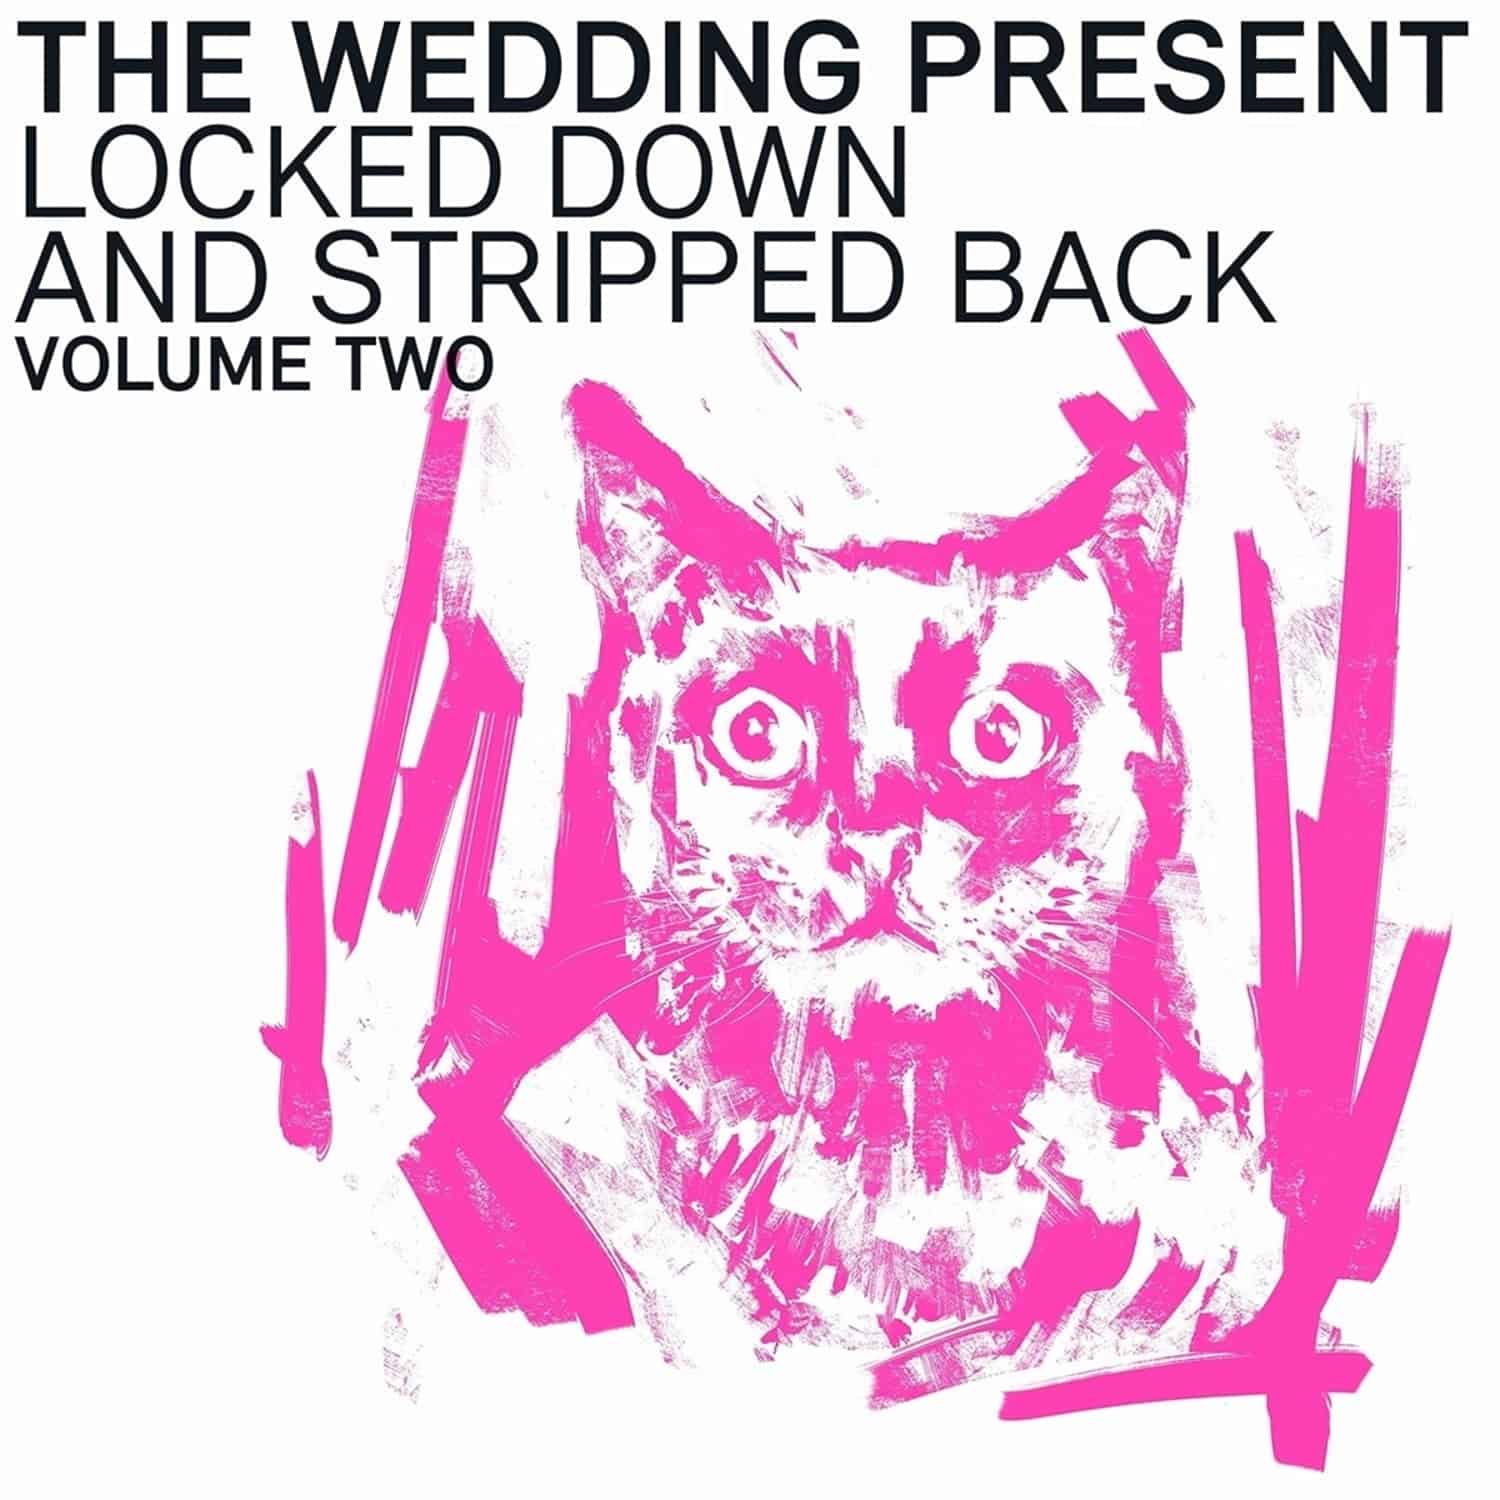 The Wedding Present - LOCKED DOWN & STRIPPED BACK VOLUME TWO 